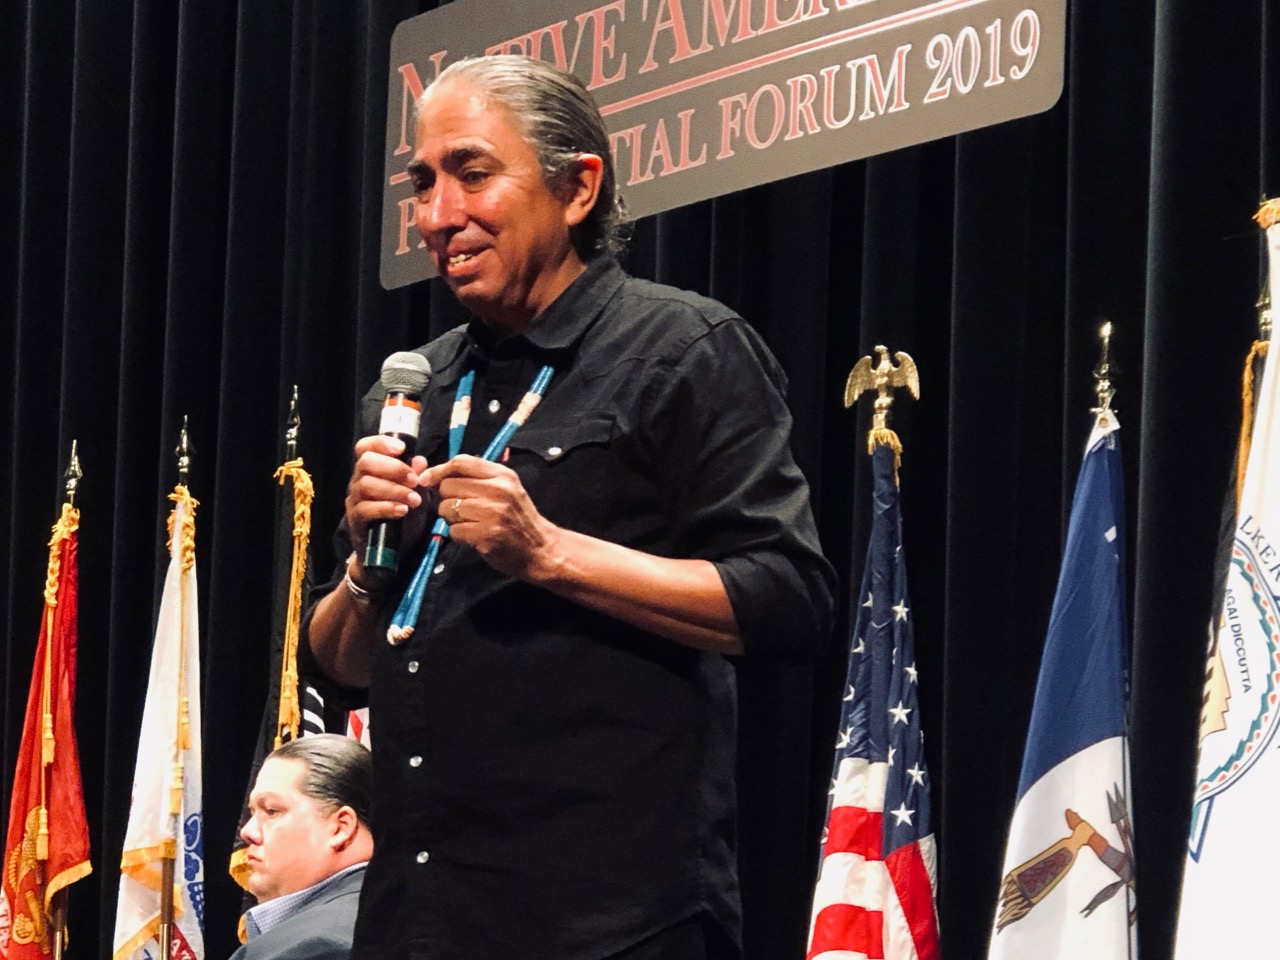 AUDIO/VIDEO: Mark Charles at Frank LaMere Native American Presidential Forum